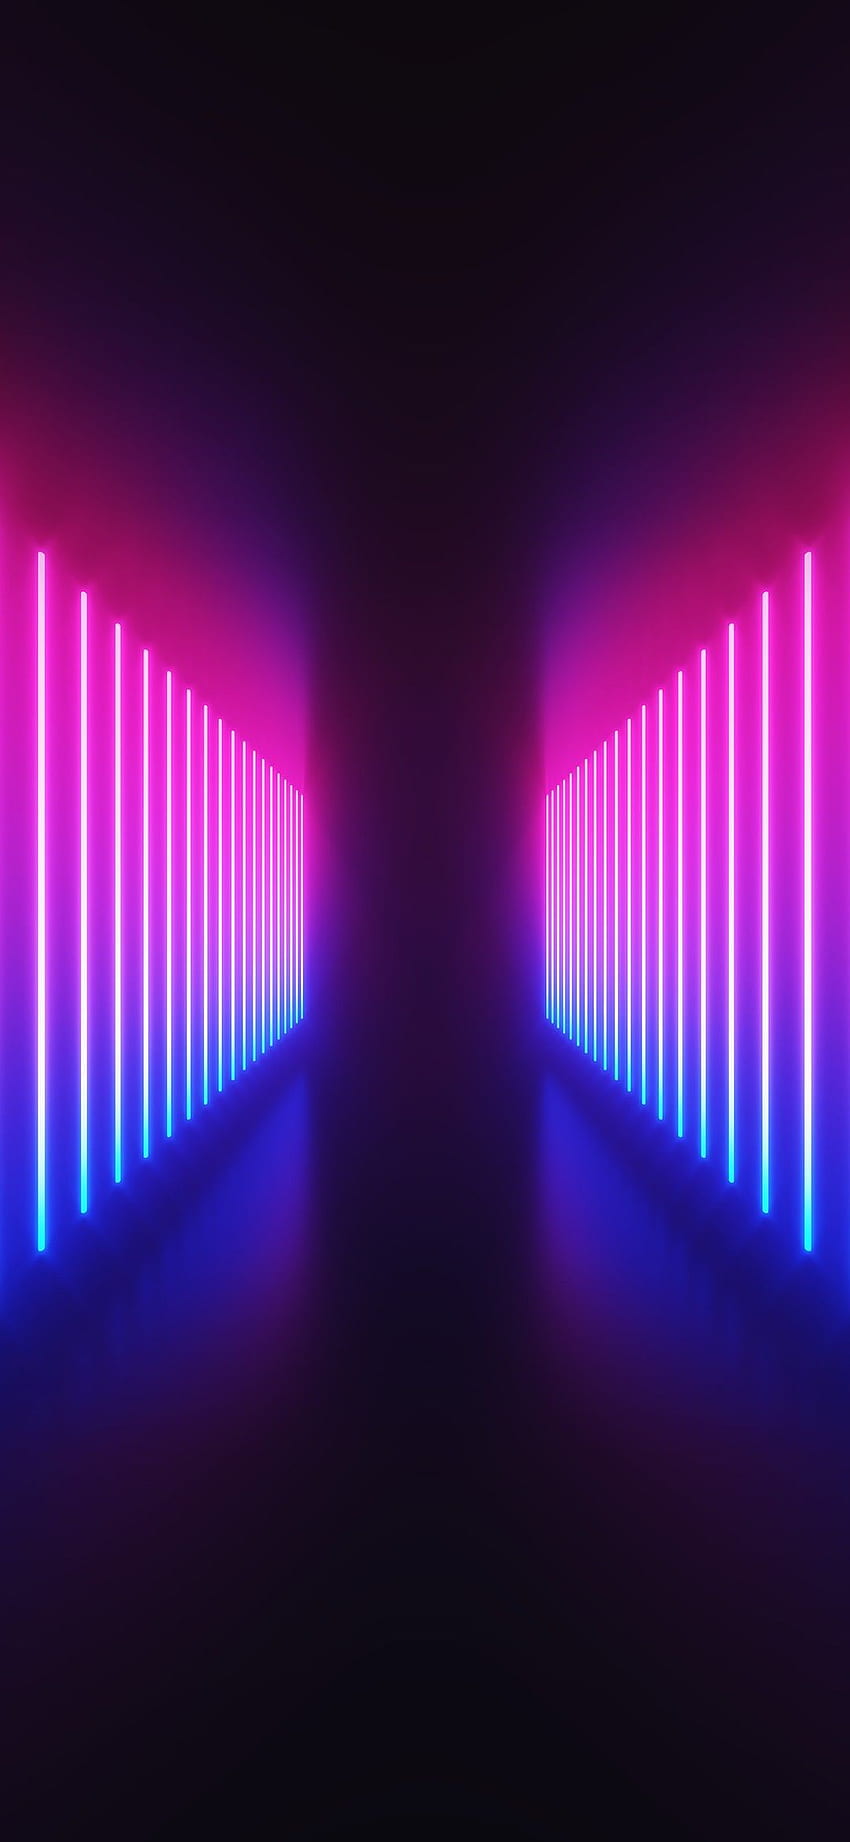 Abstract Neon Light Background Abstract Wallpaper 4k Wallpaper Neon Wallpaper  Background Image And Wallpaper for Free Download